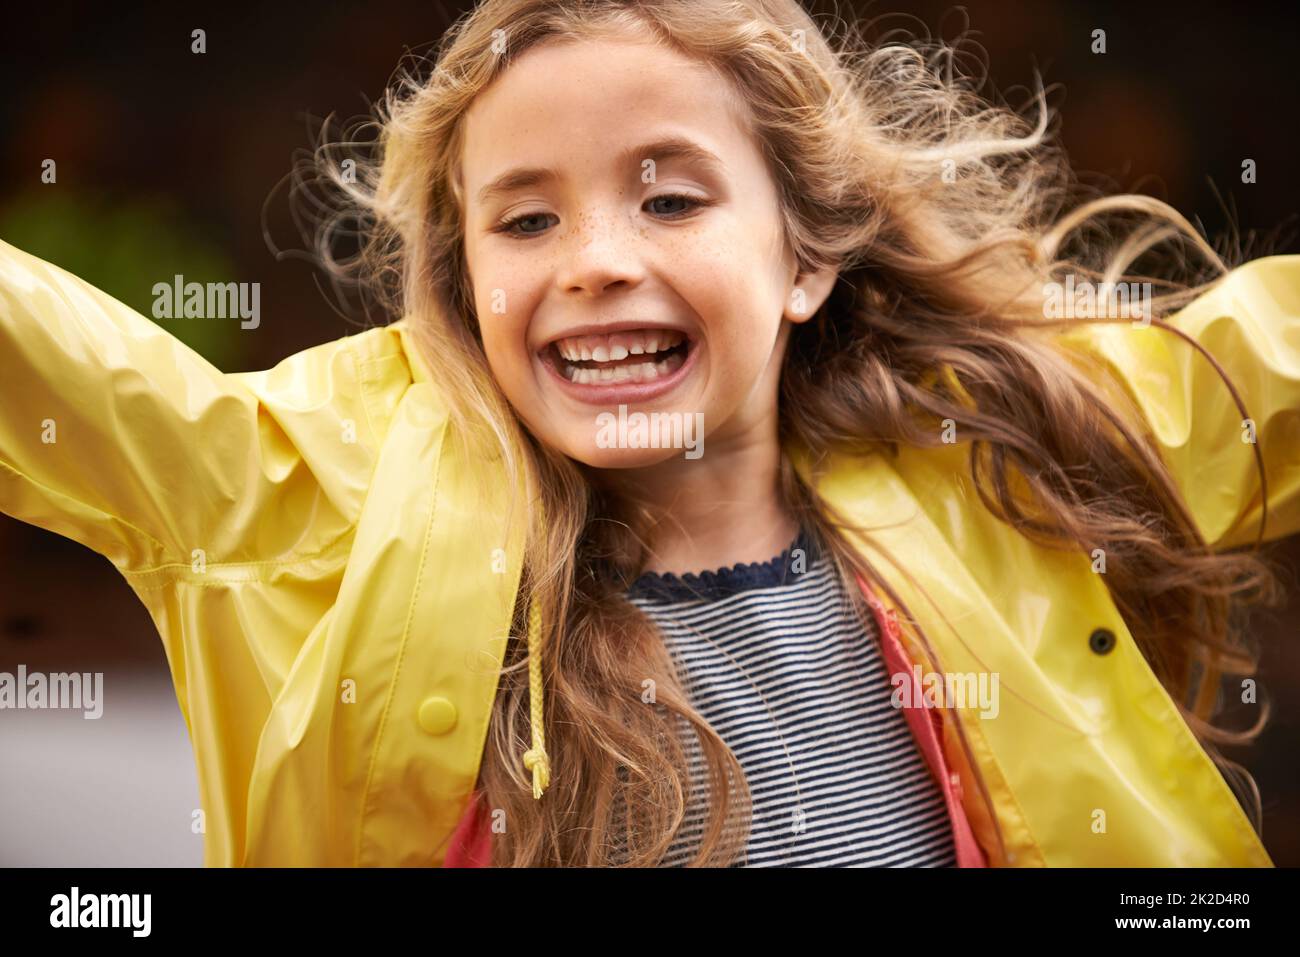 Squeal for joy. Shot of a cute little girl wearing a raincoat playing outside. Stock Photo